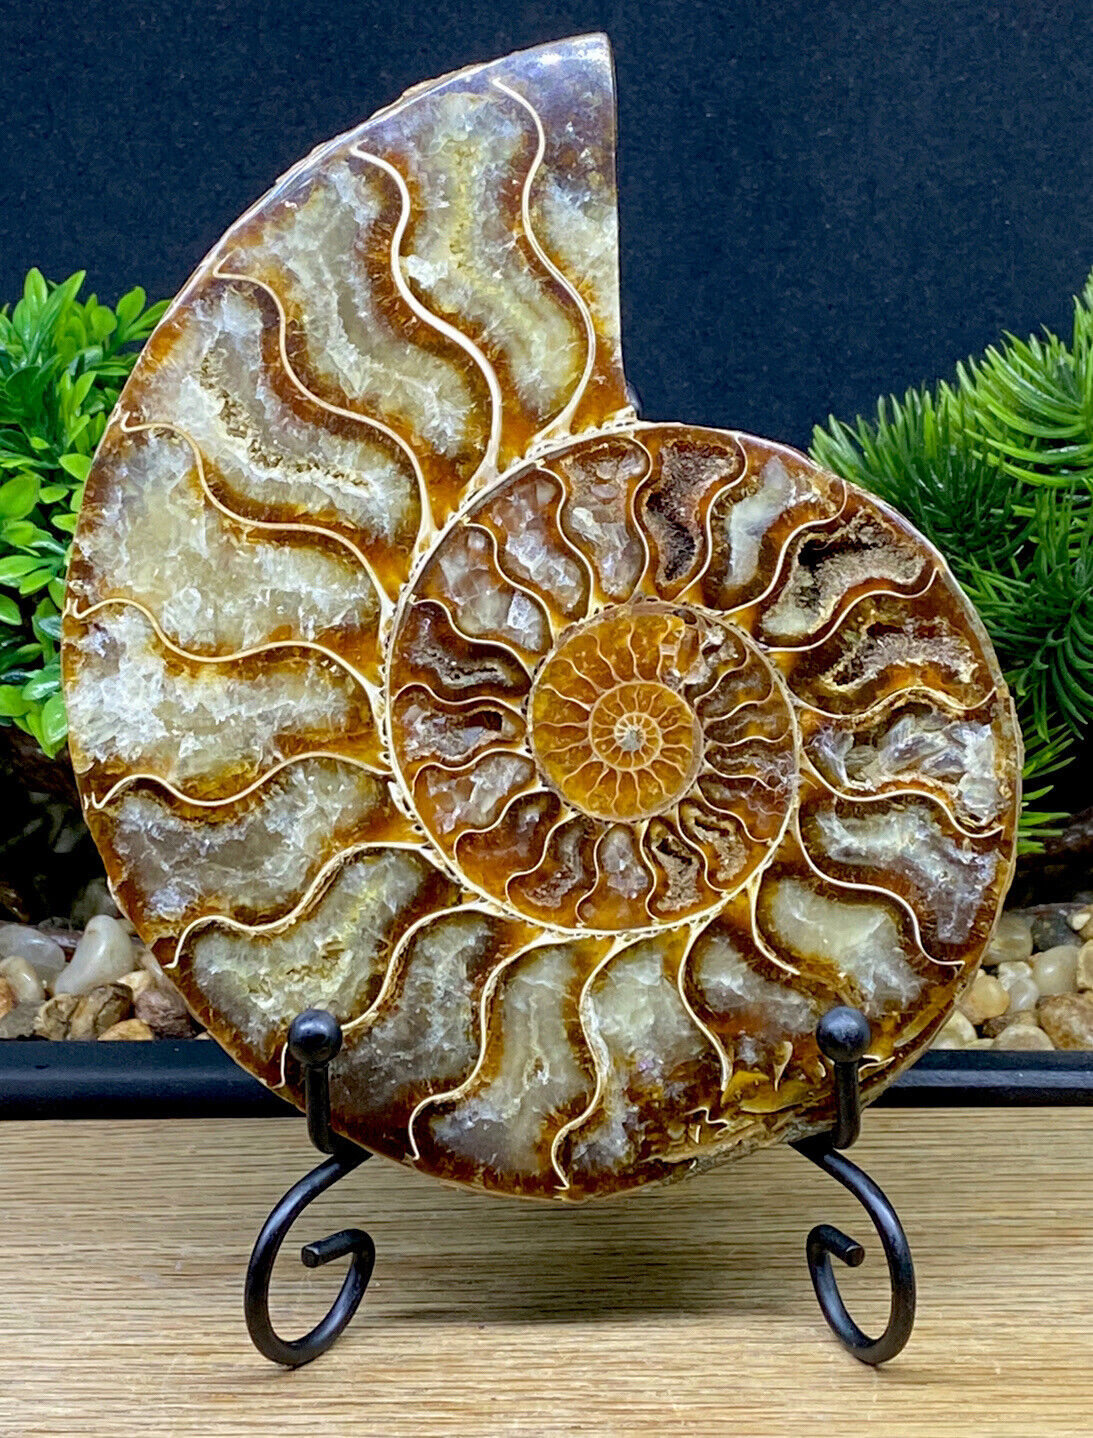 Large 160g, 416 Million Year Old Ammonite Madagascan Crystal Fossil+Metal Stand